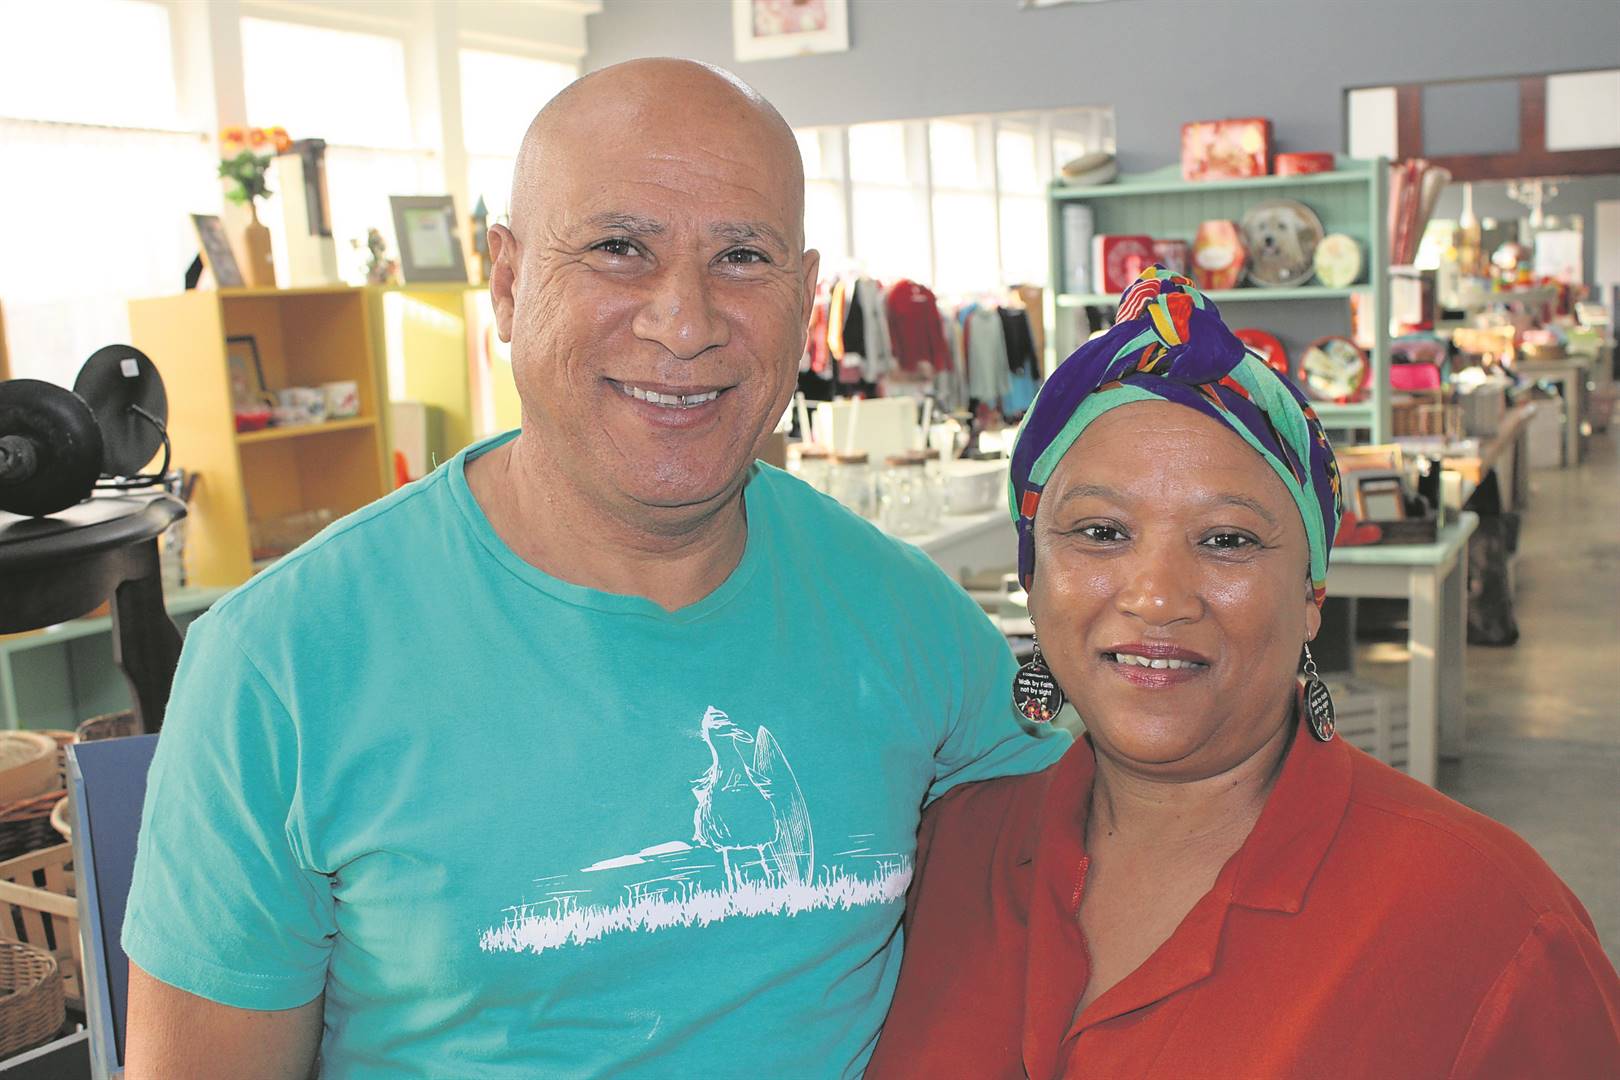 Macassar husband-and-wife-duo Jurie and Sureta Adendorf popped into the facility’s second-hand store for good-condition preloved books which they resell at a market in Franschhoek. The business couple will also be in book-sale action at the upcoming Franschhoek Literary Festival. 